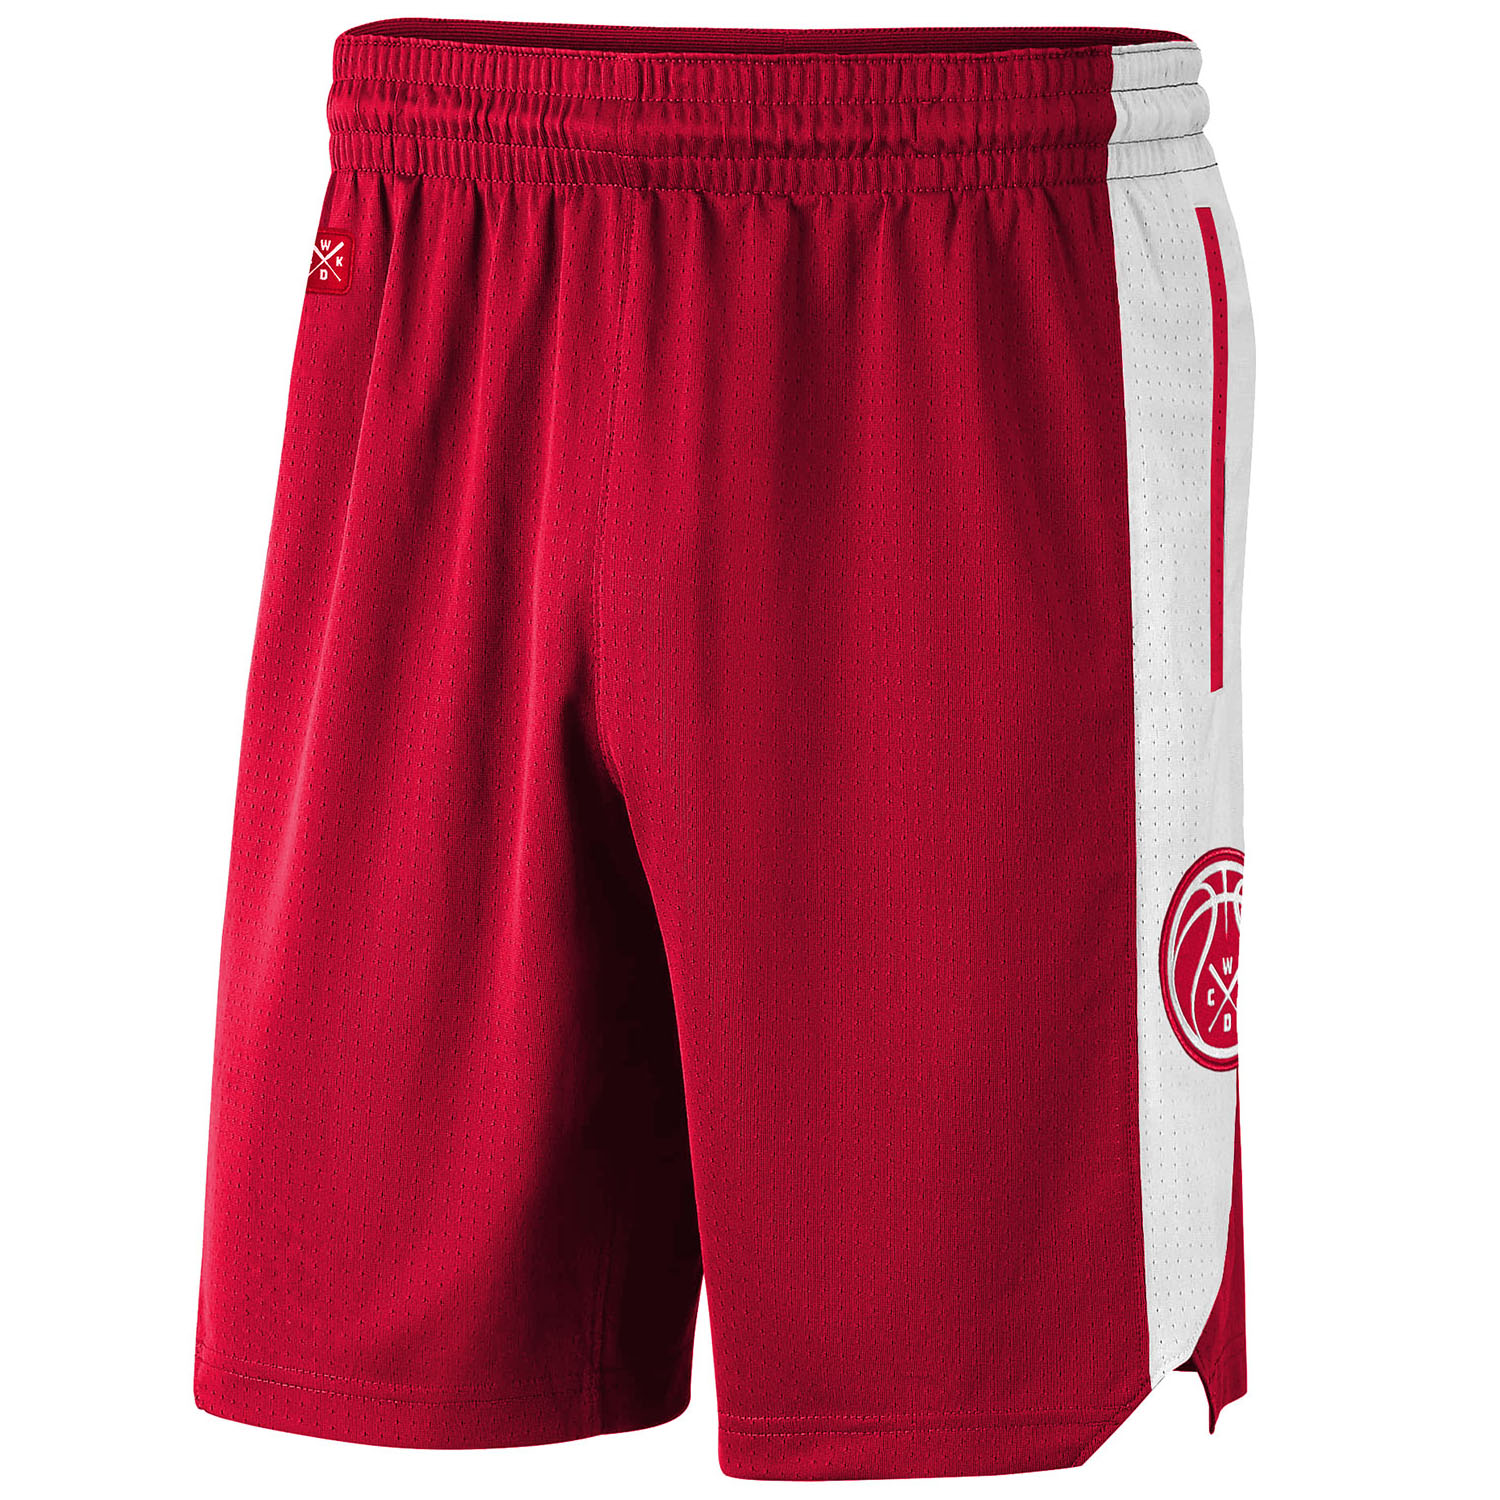 WICKED ONE Fitness Shorts, Playoffs, rot-weiß, M